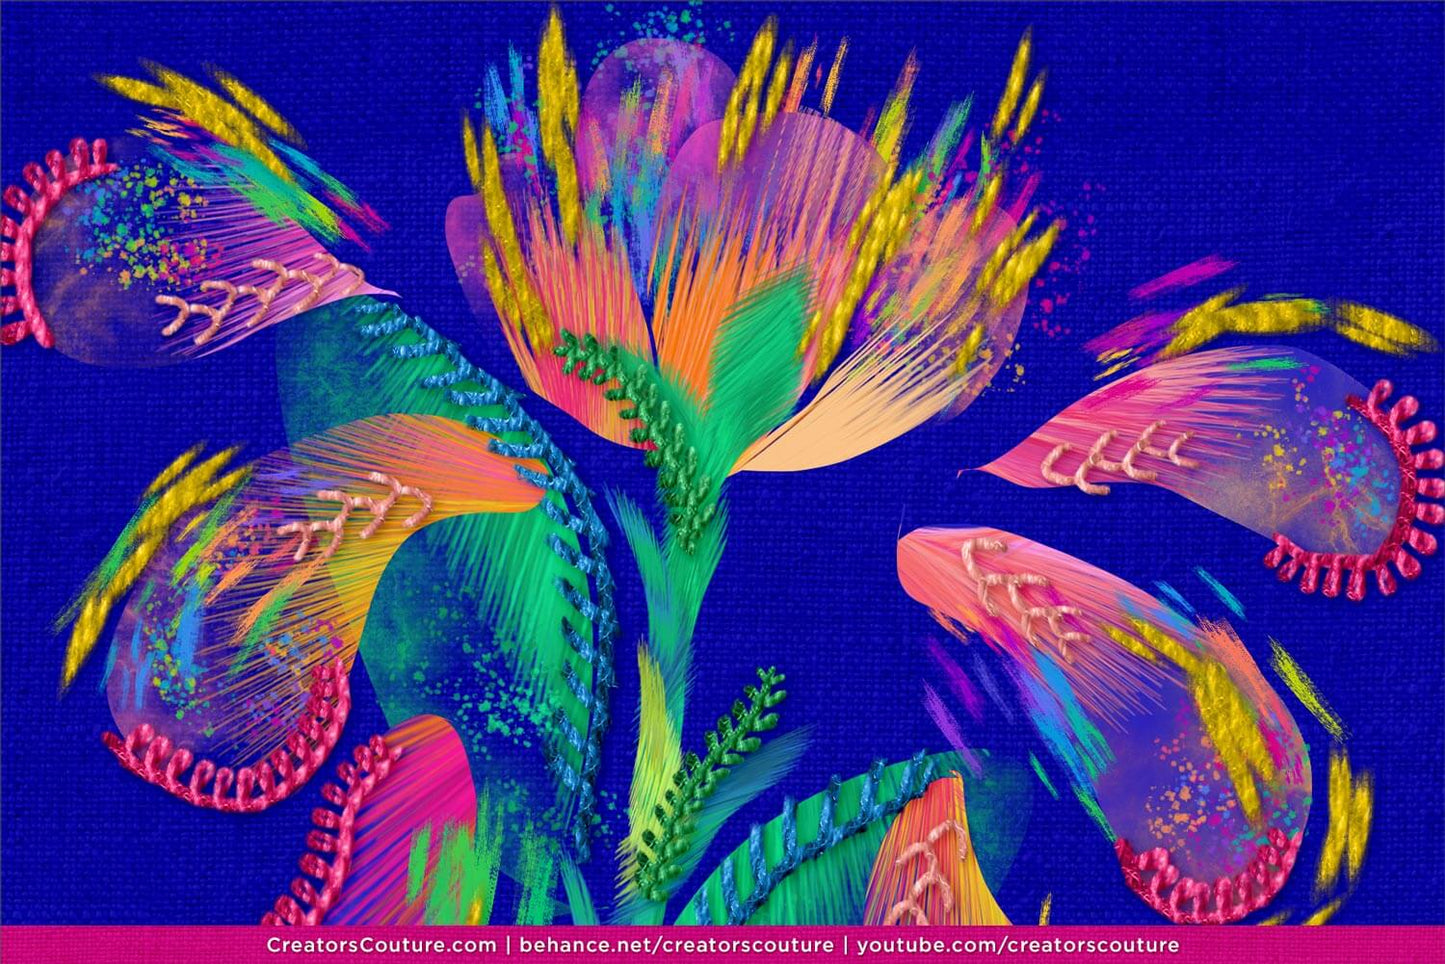 mixed media illustration using digital embroidery photoshop brushes, a colorful flower